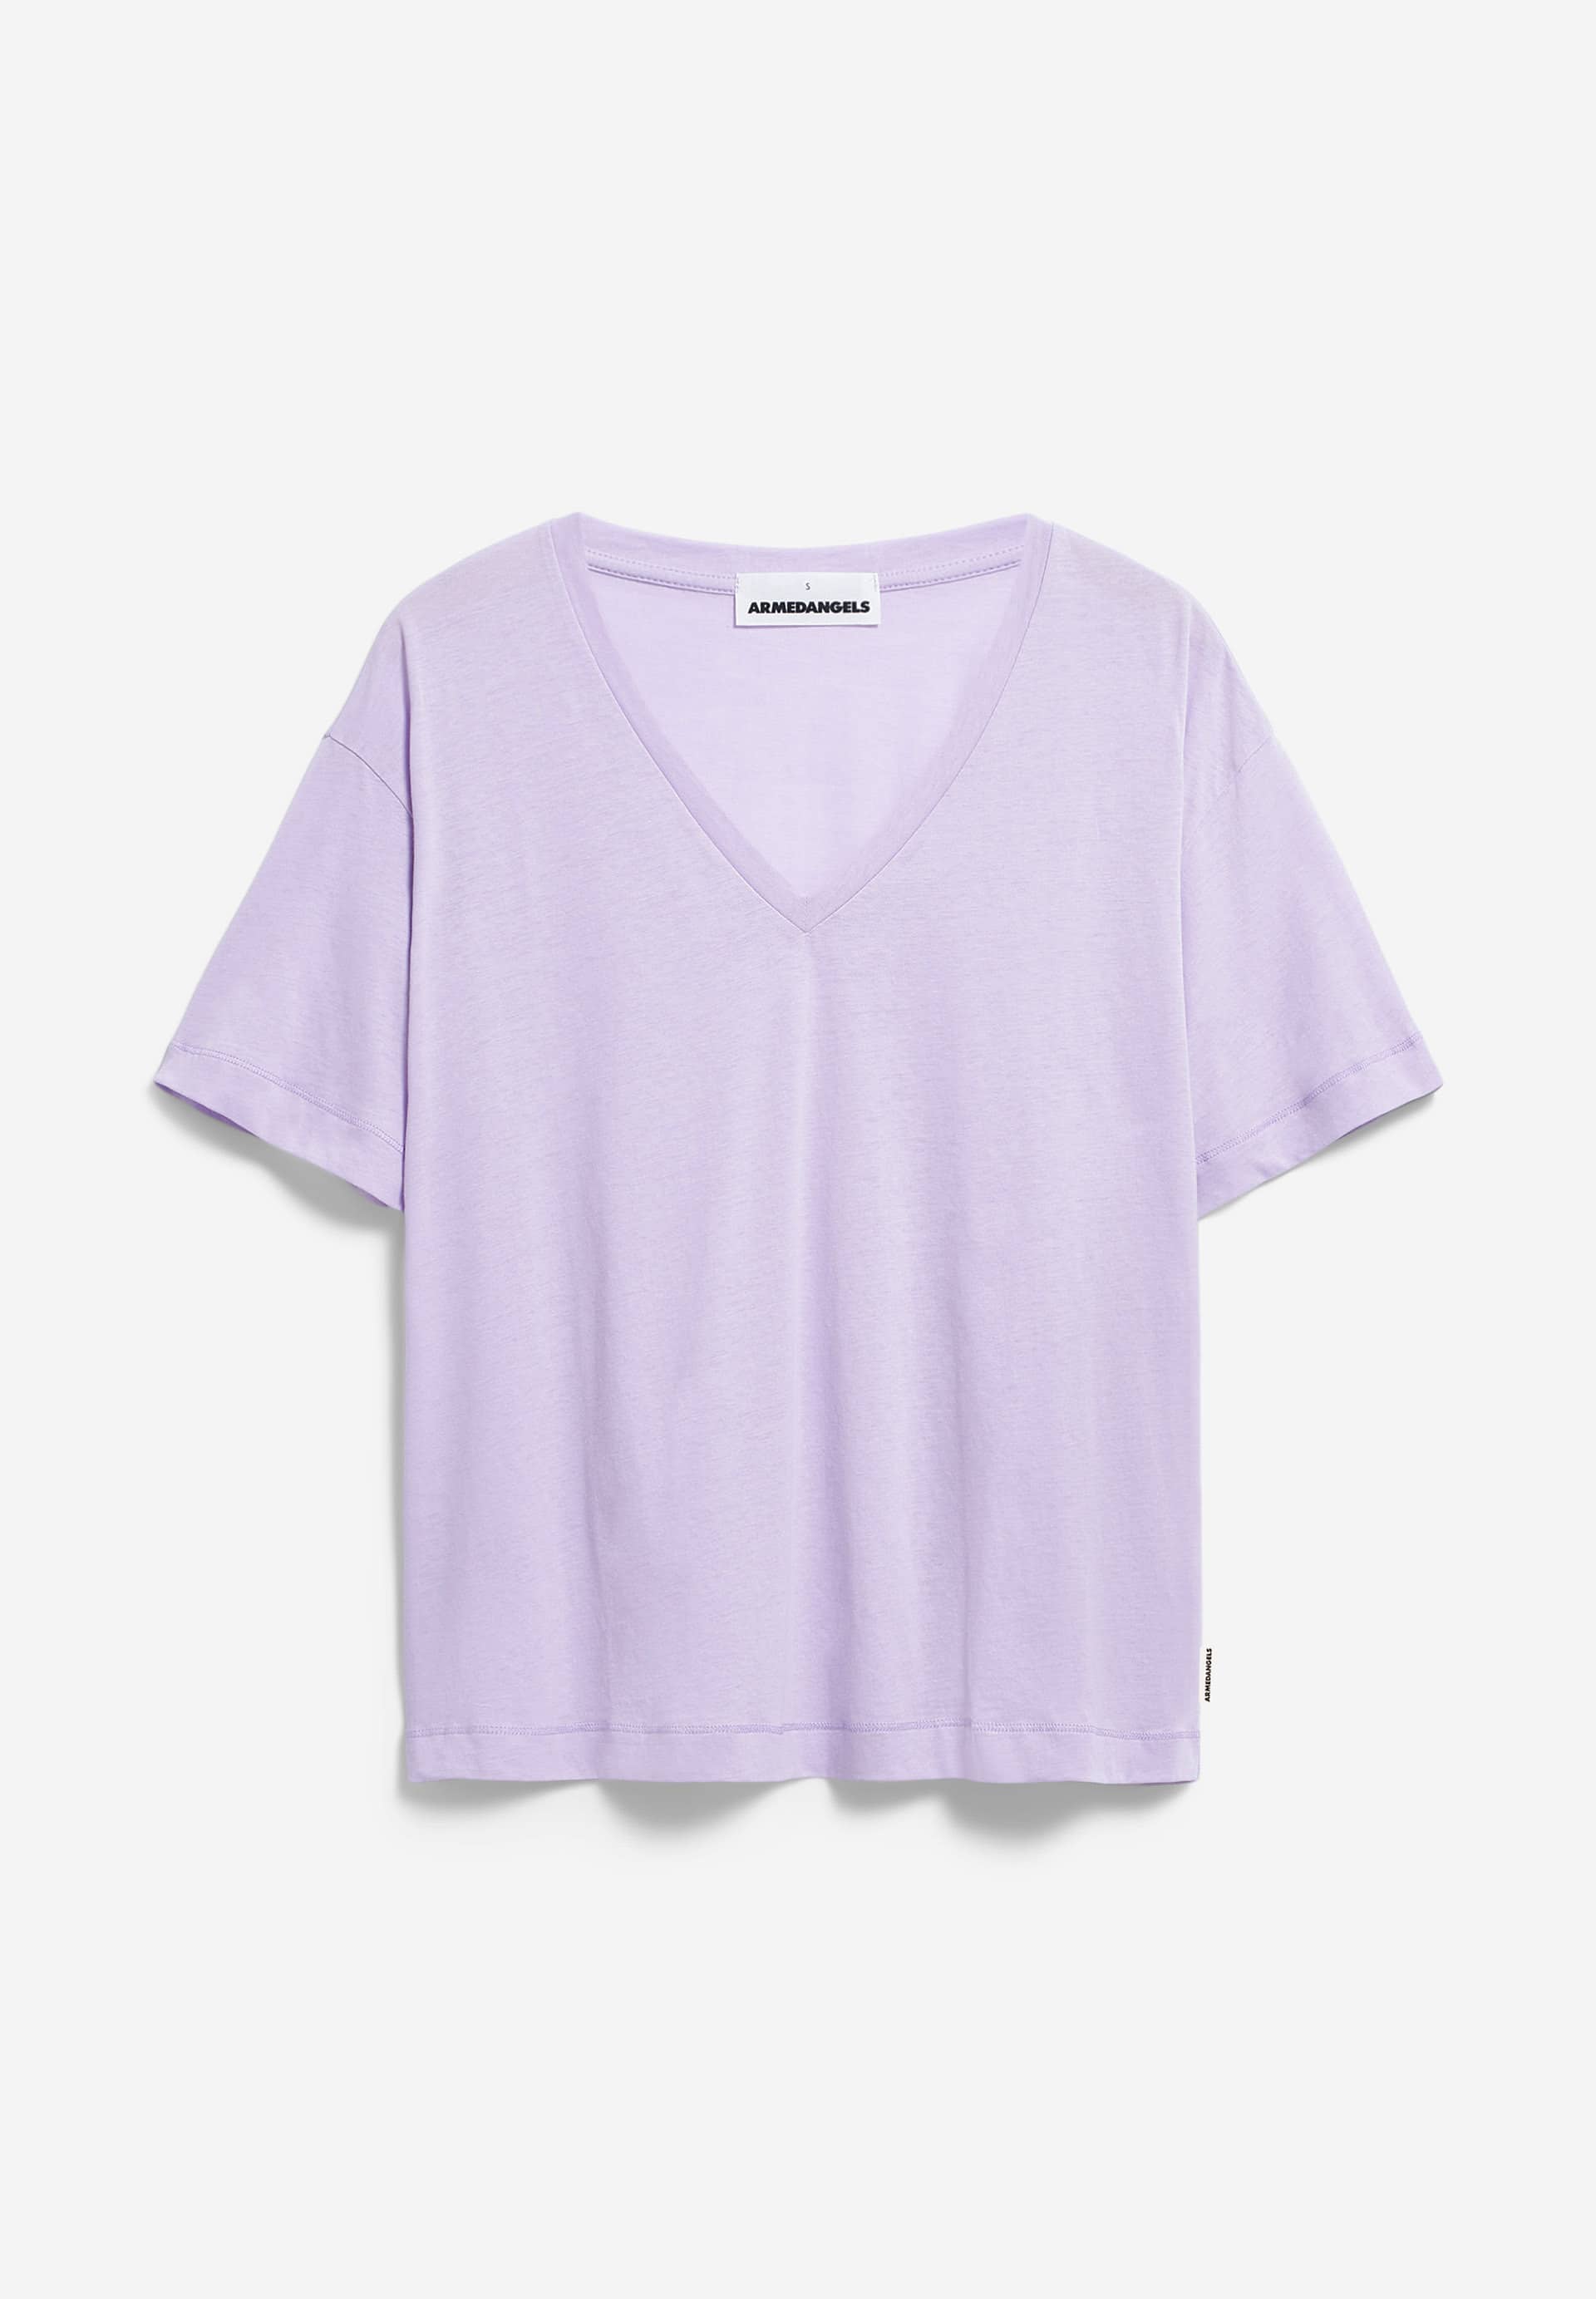 DEMIKAA T-Shirt Oversized Fit made of Organic Cotton